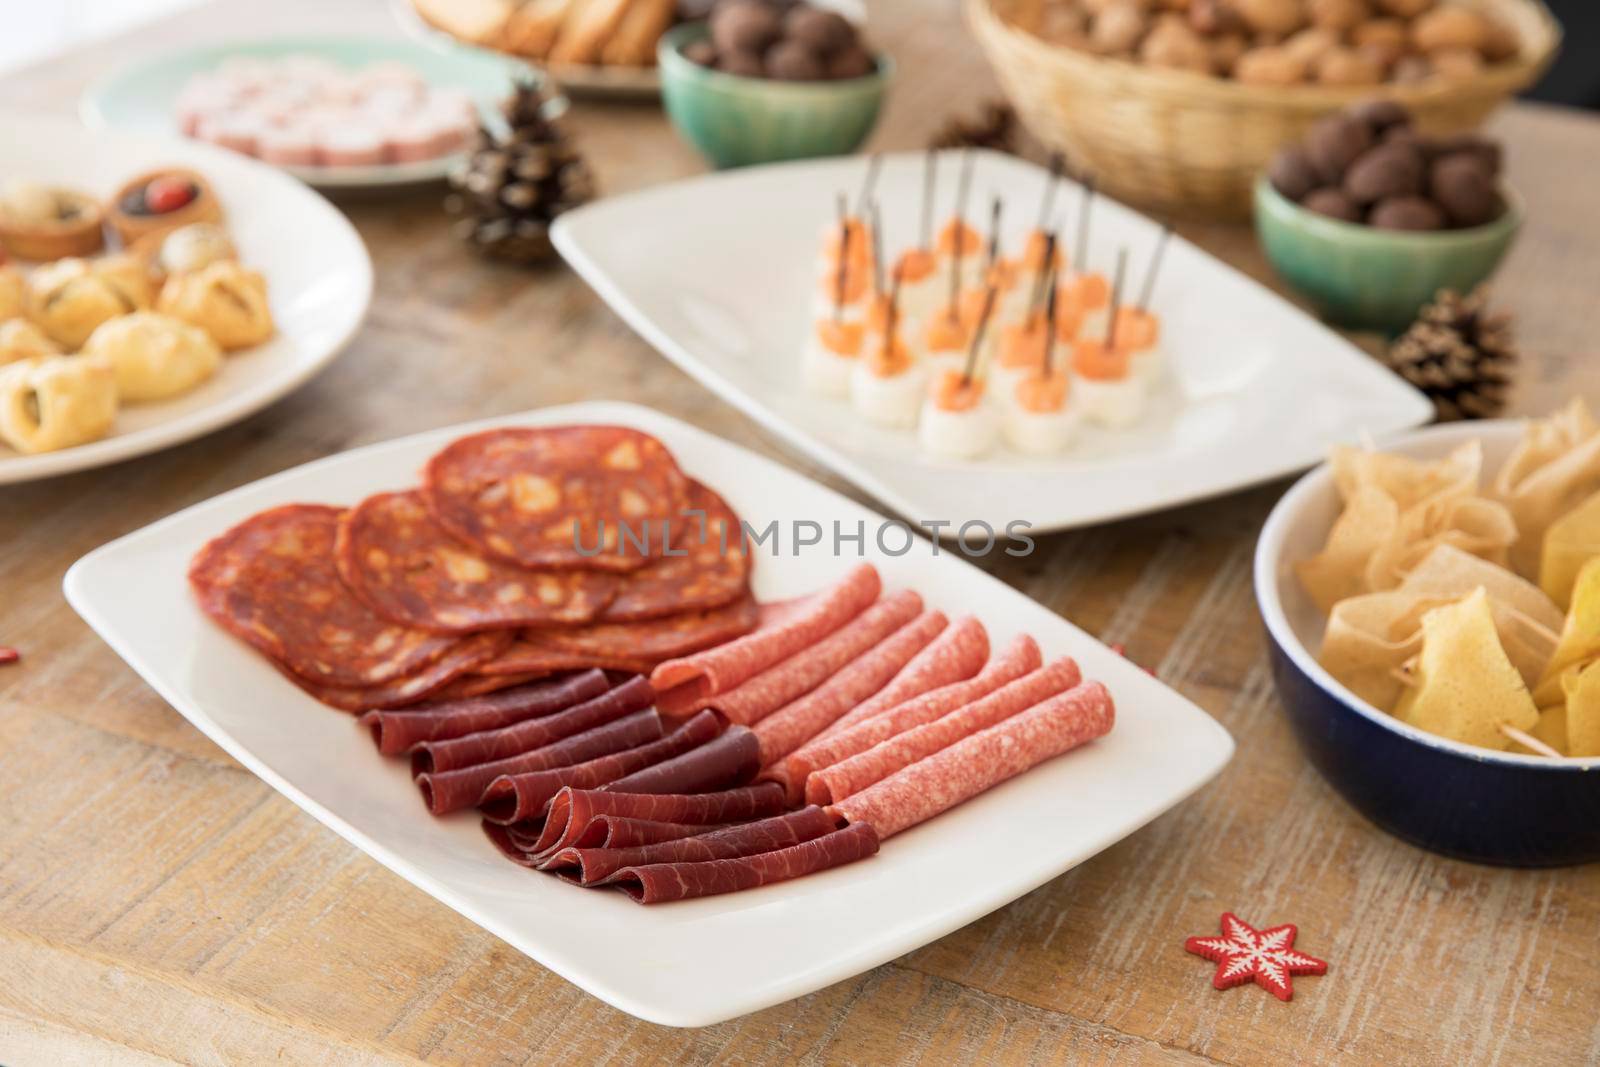 Slices of chorizo, salami and beef on buffet table.